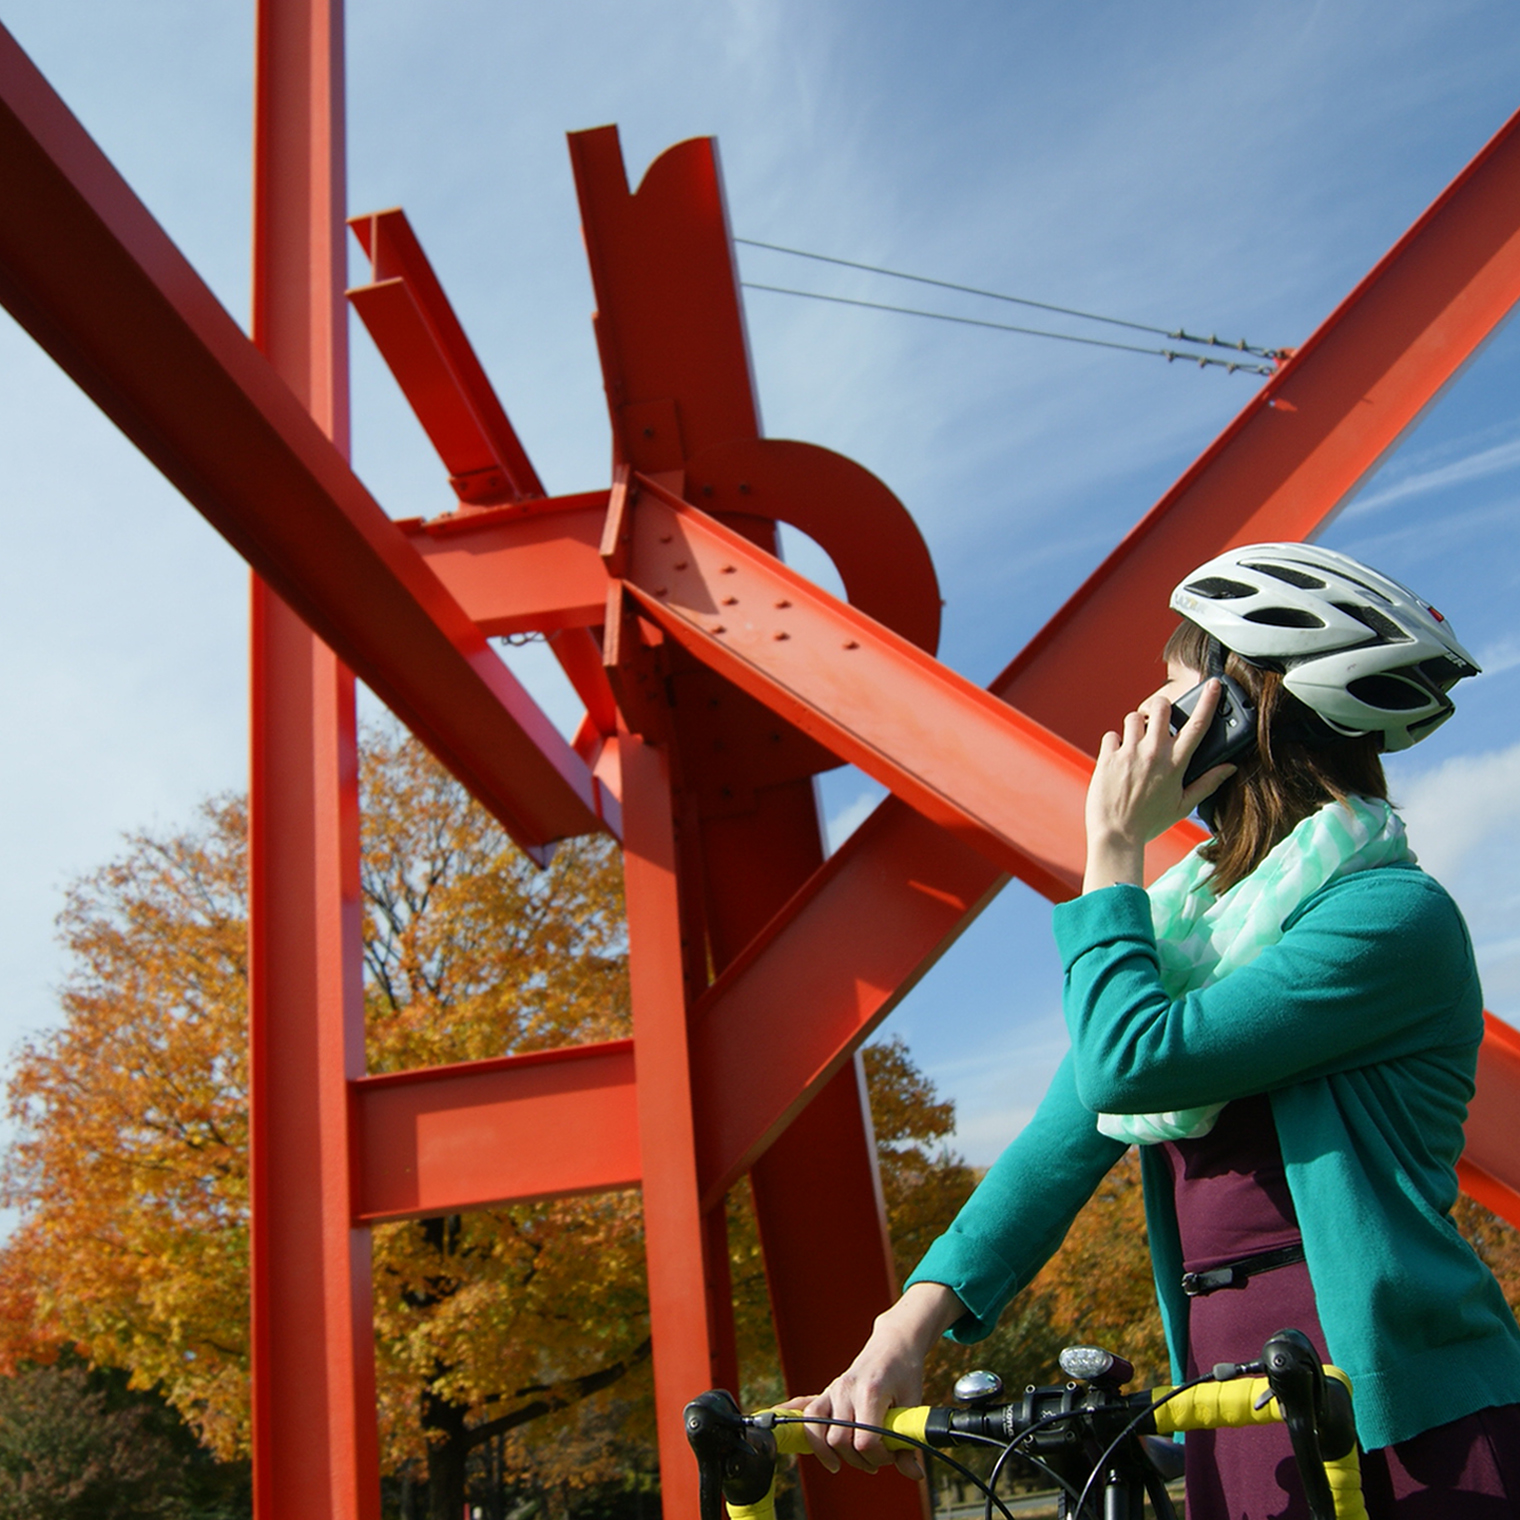 A cyclist accesses Museum Without Walls by phone at the Iroquois sculpture